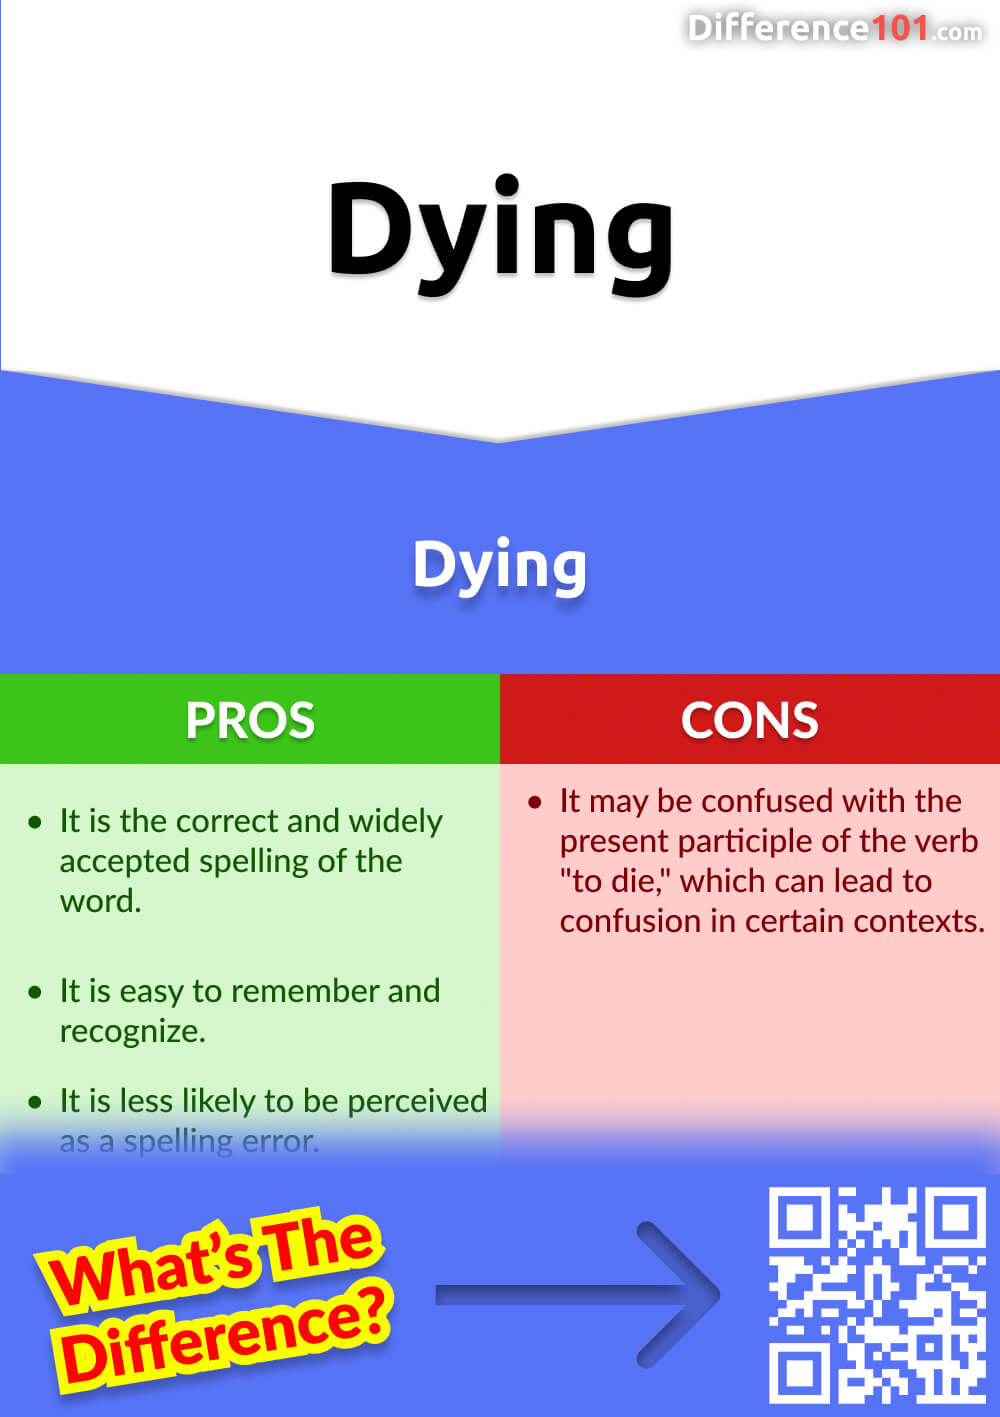 Dying Pros & Cons